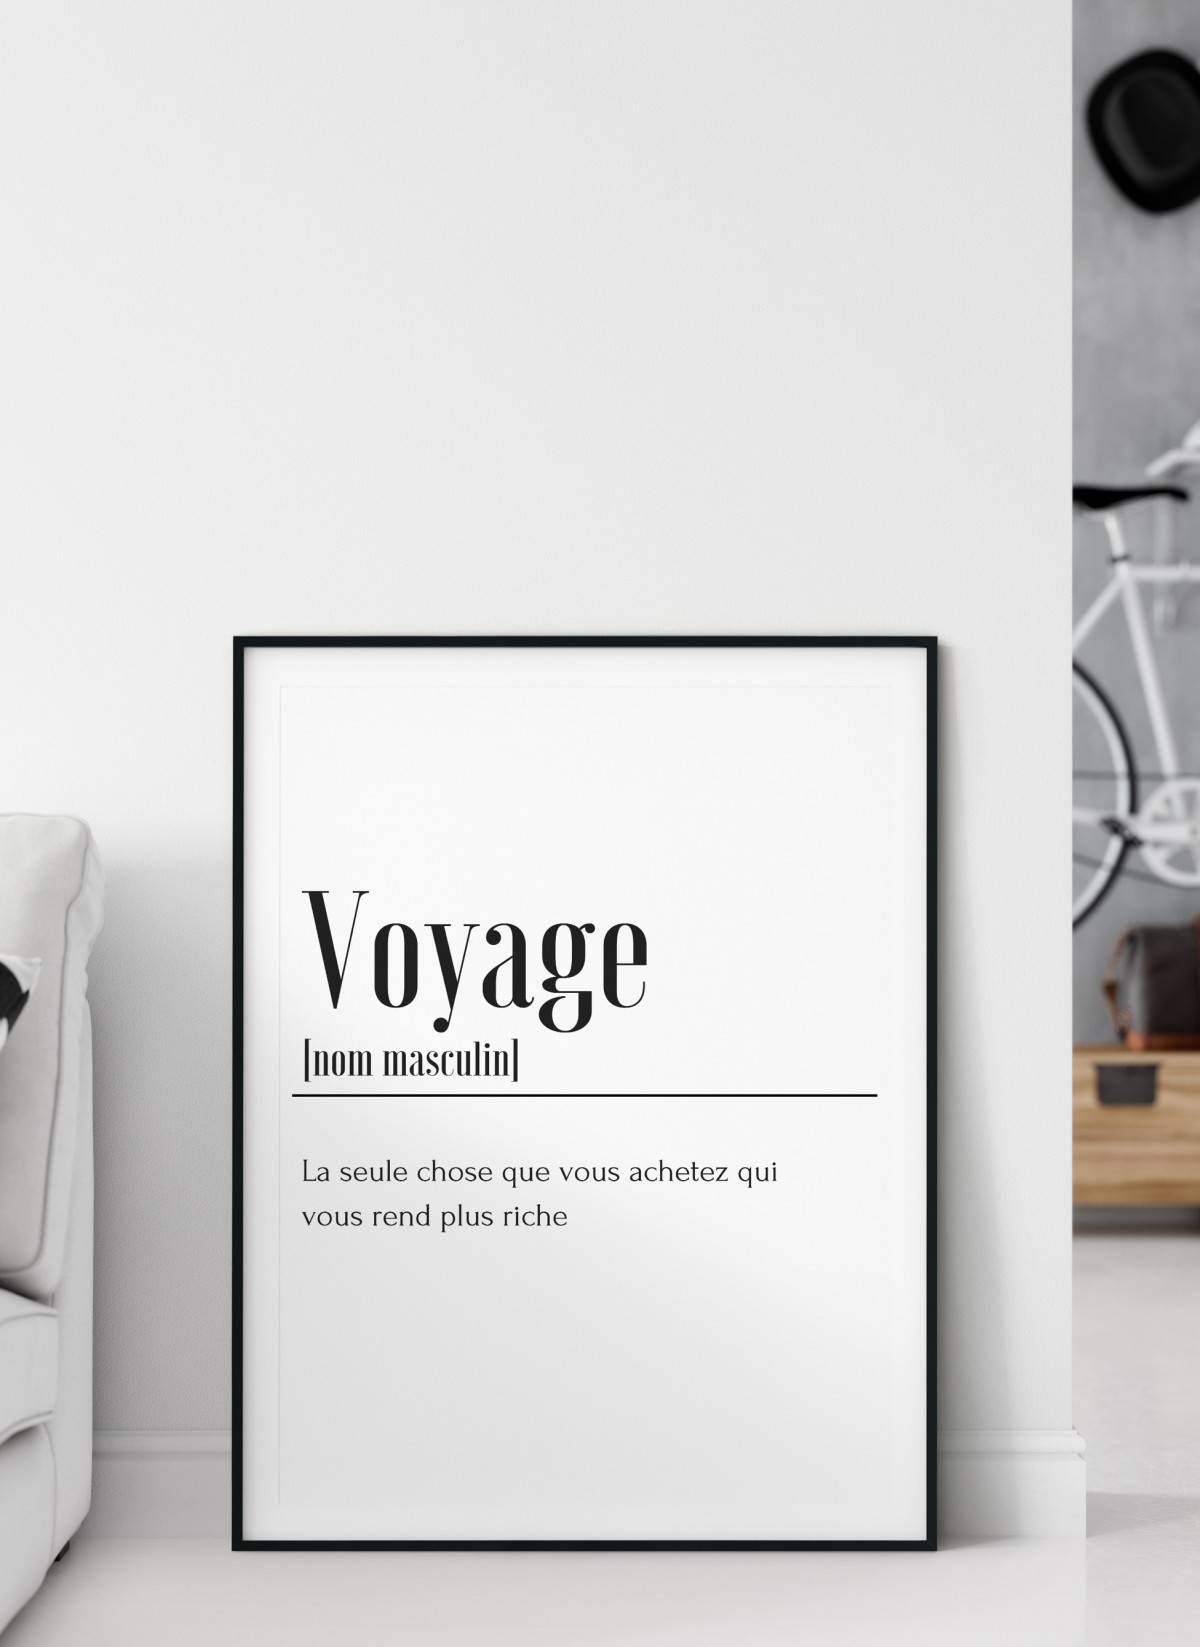 voyage definition french